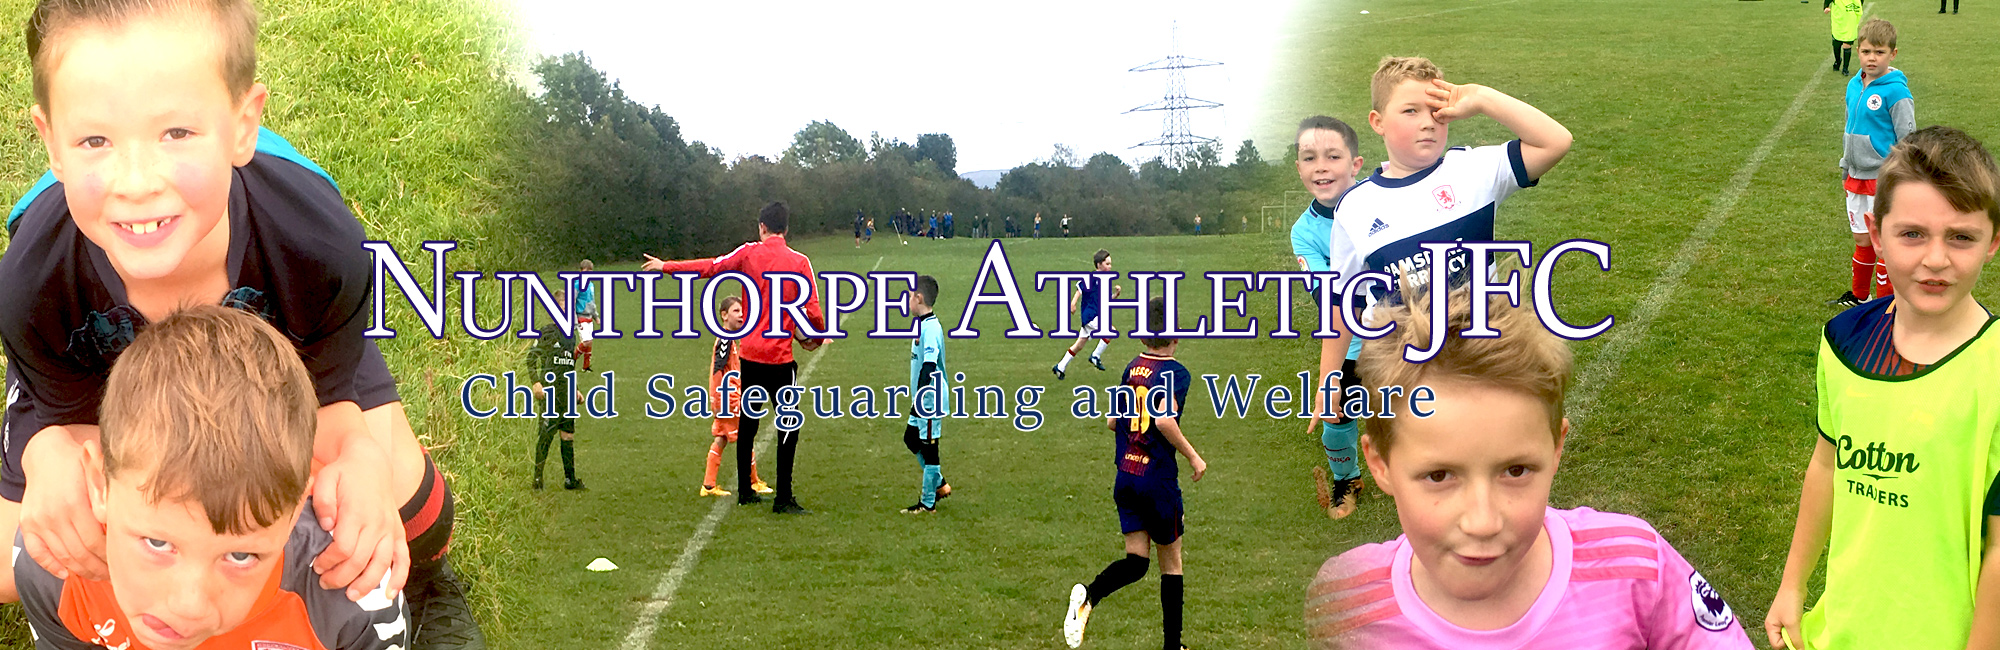 Child Protection and Safety at Nunthorpe Athletic JFC